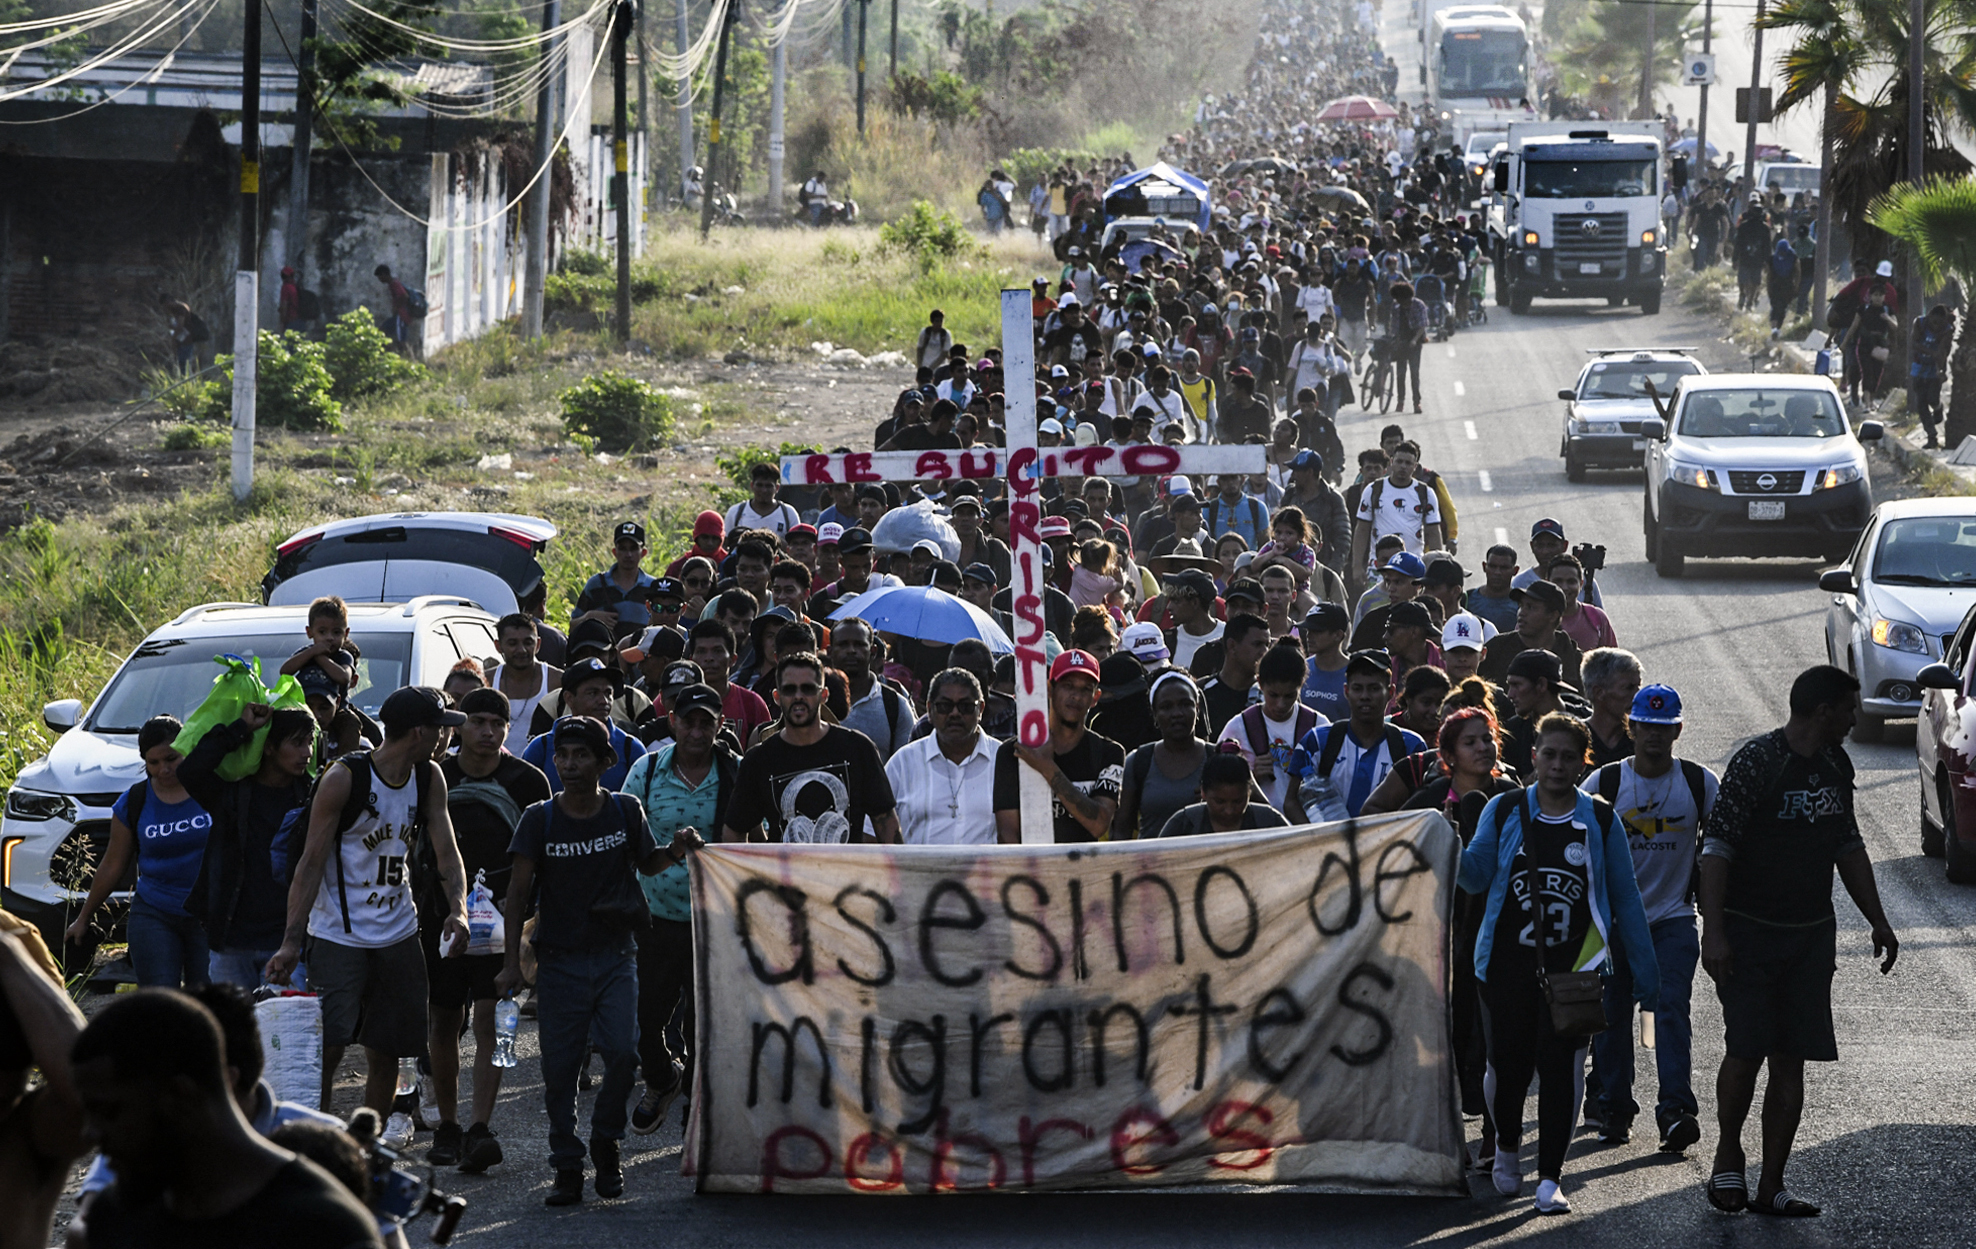 migrants carry a cross border between Mexico and the United States